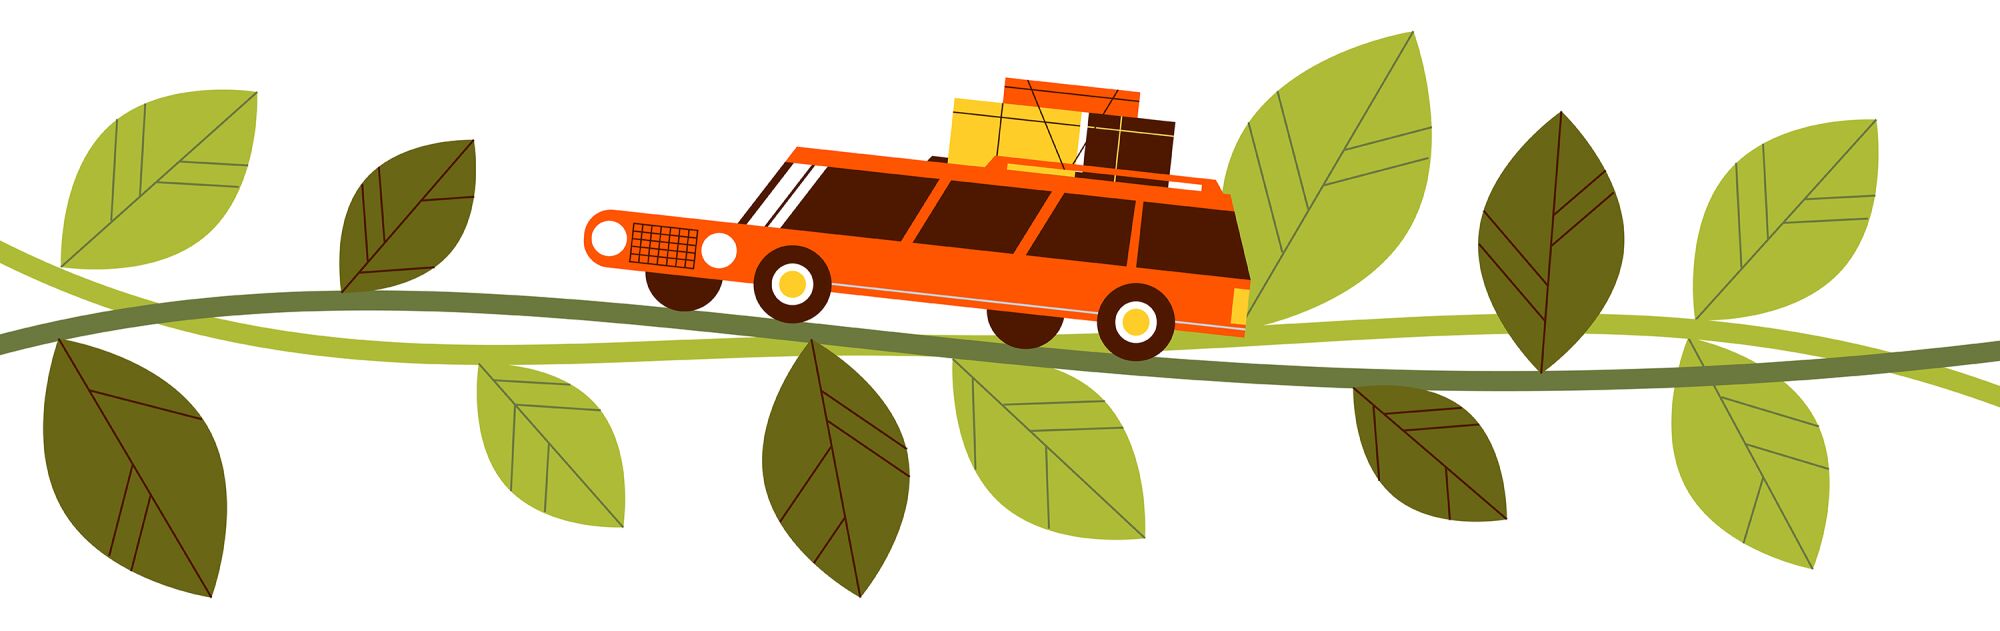 Illustration of a station wagon with boxes strapped to the roof driving across a vine.